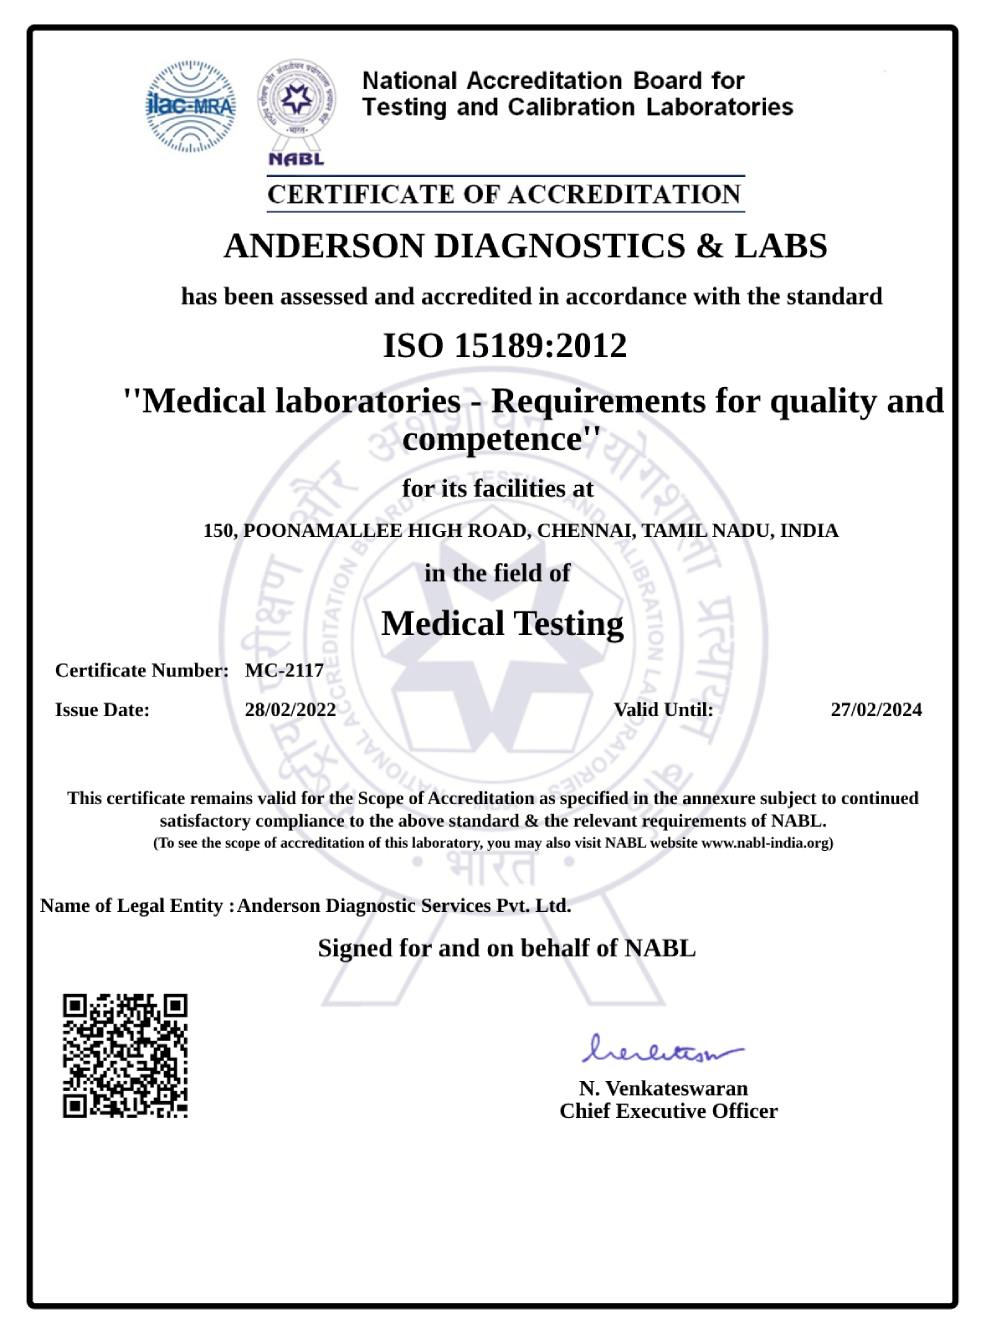 Image of NABL Accreditation Certificate.